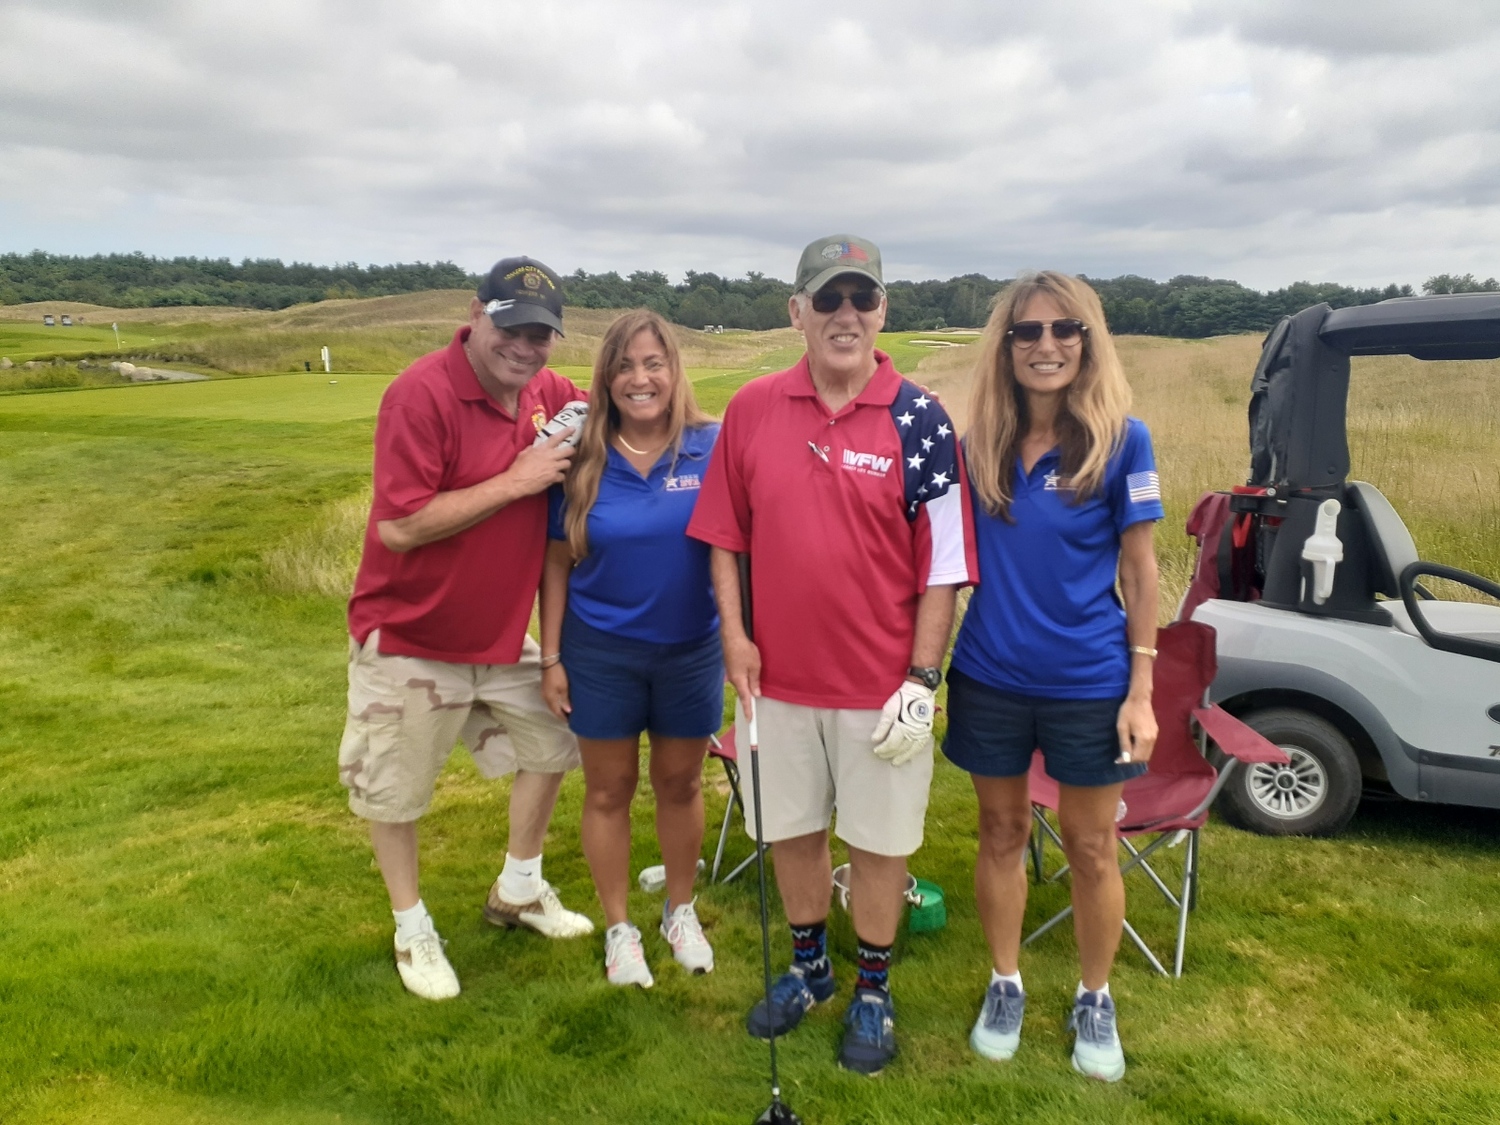 VFW Post 5350 held its annual golf outing at The Vineyards in Riverhead on August 28. Team EVA, from left,  Susan Warsaw and Eva Casale, along with Warrior Ranch Foundation with Eileen Shanahan and Gina, were just of few of the many that help our Post live our motto 